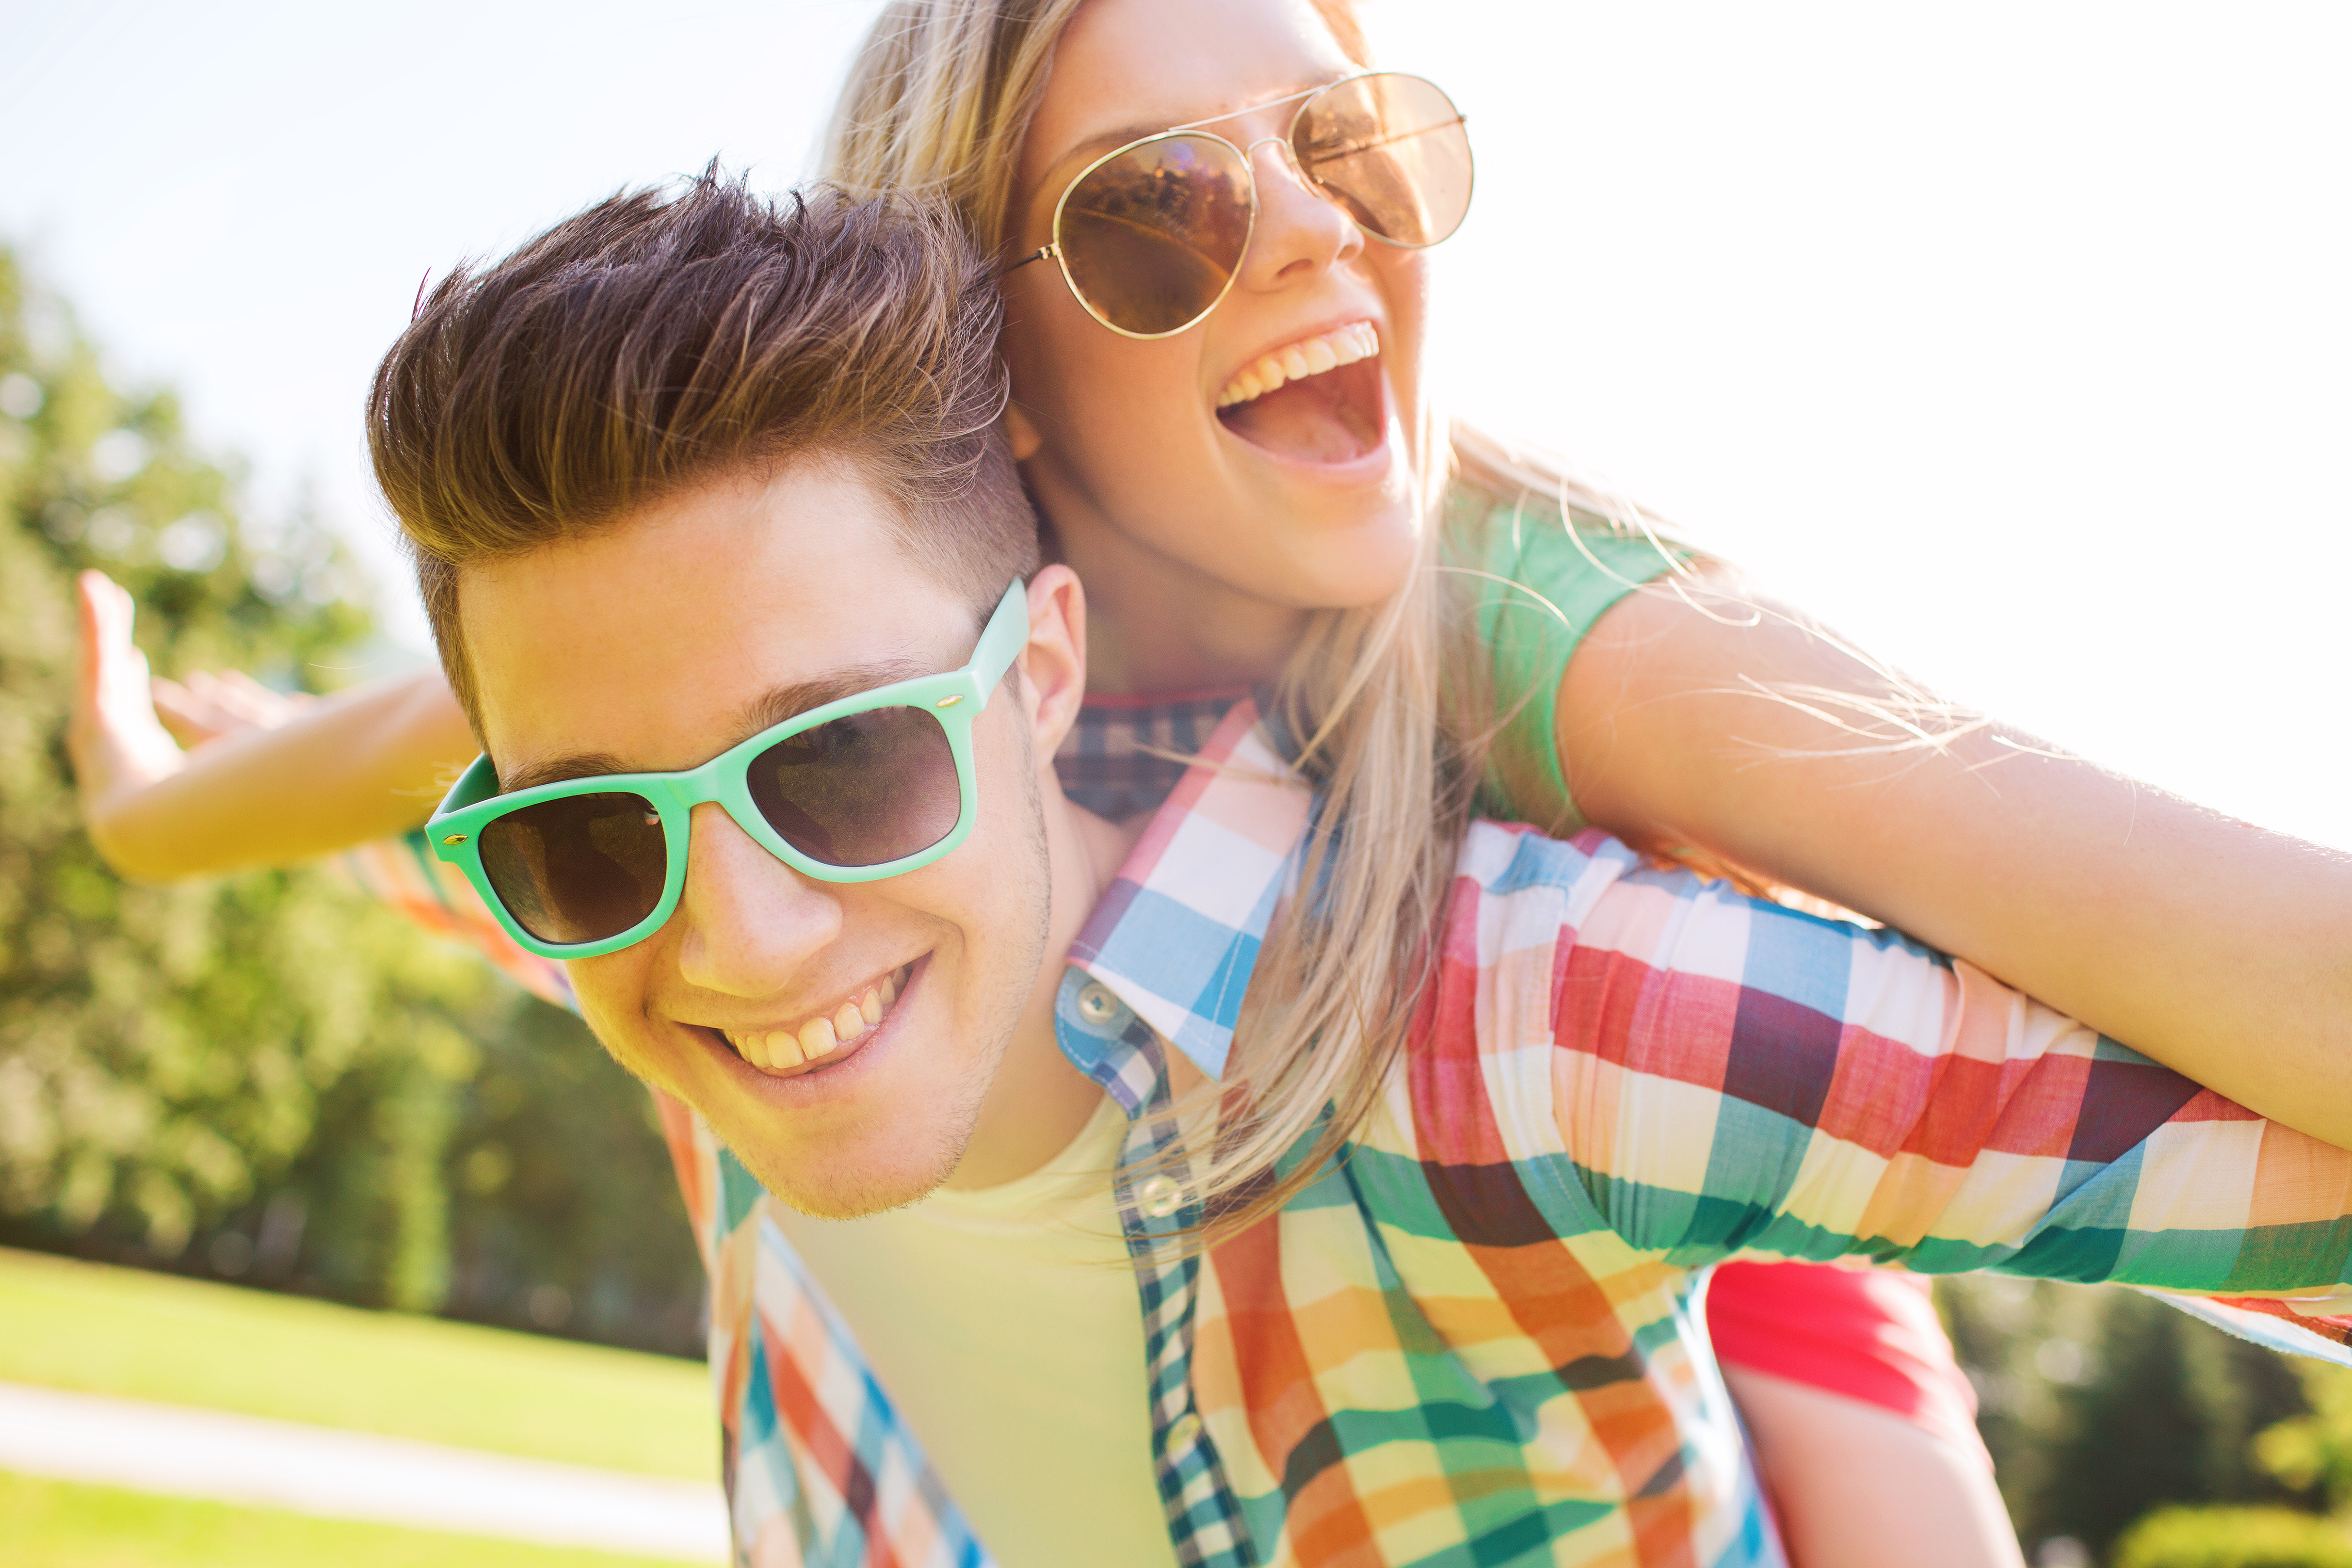 A happy young couple with sunglasses on smiling in the sun | Source: Shutterstock